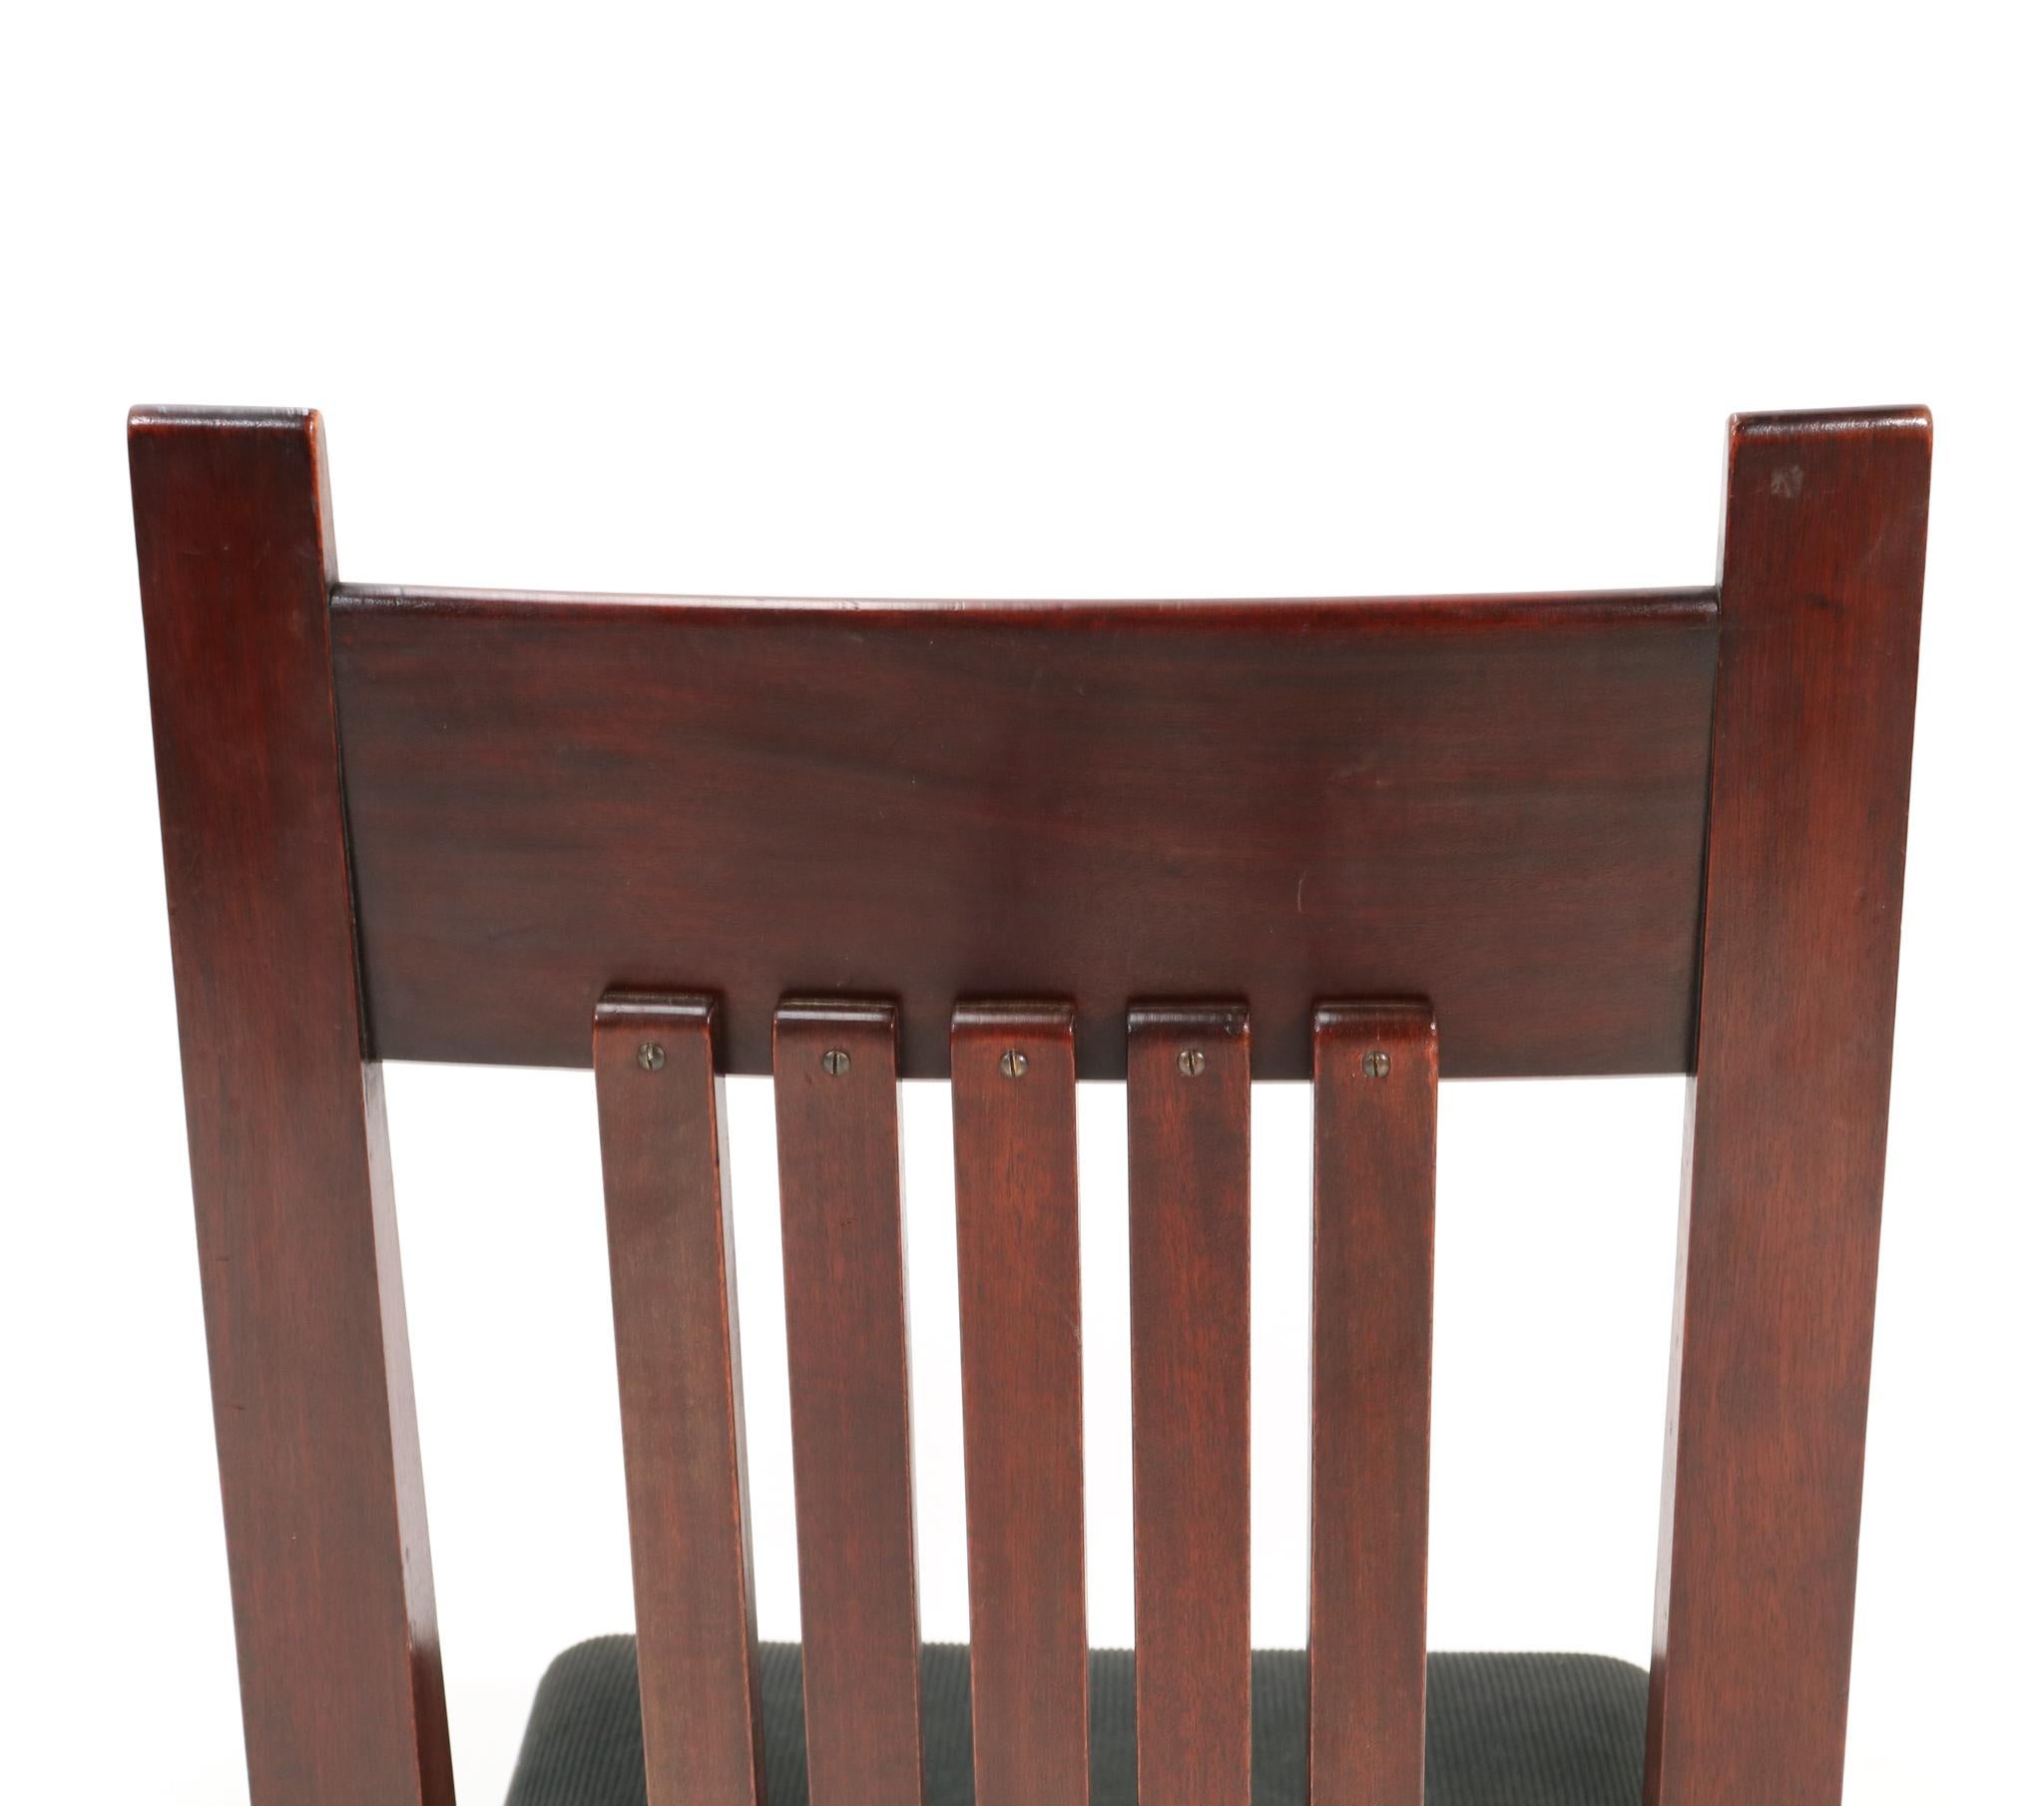 Mahogany Art Deco Modernist High Back Chair by Hendrik Wouda for Pander, 1924 For Sale 4